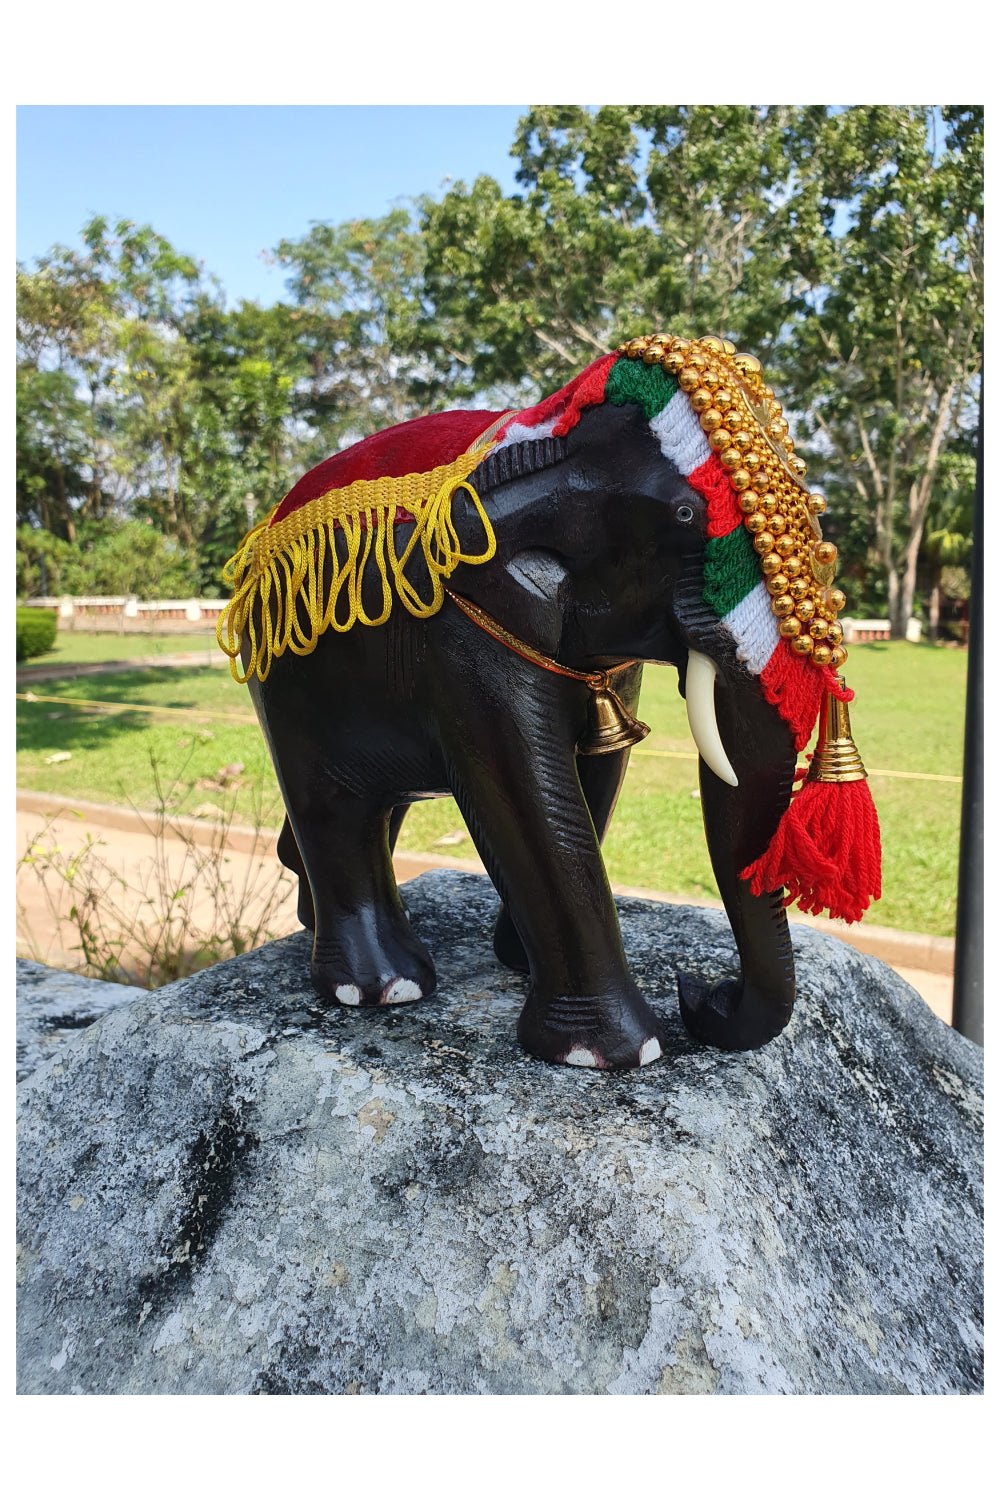 Southloom Handmade Temple Elephant Handicraft (Carved from Mahogany Wood) 8 Inches